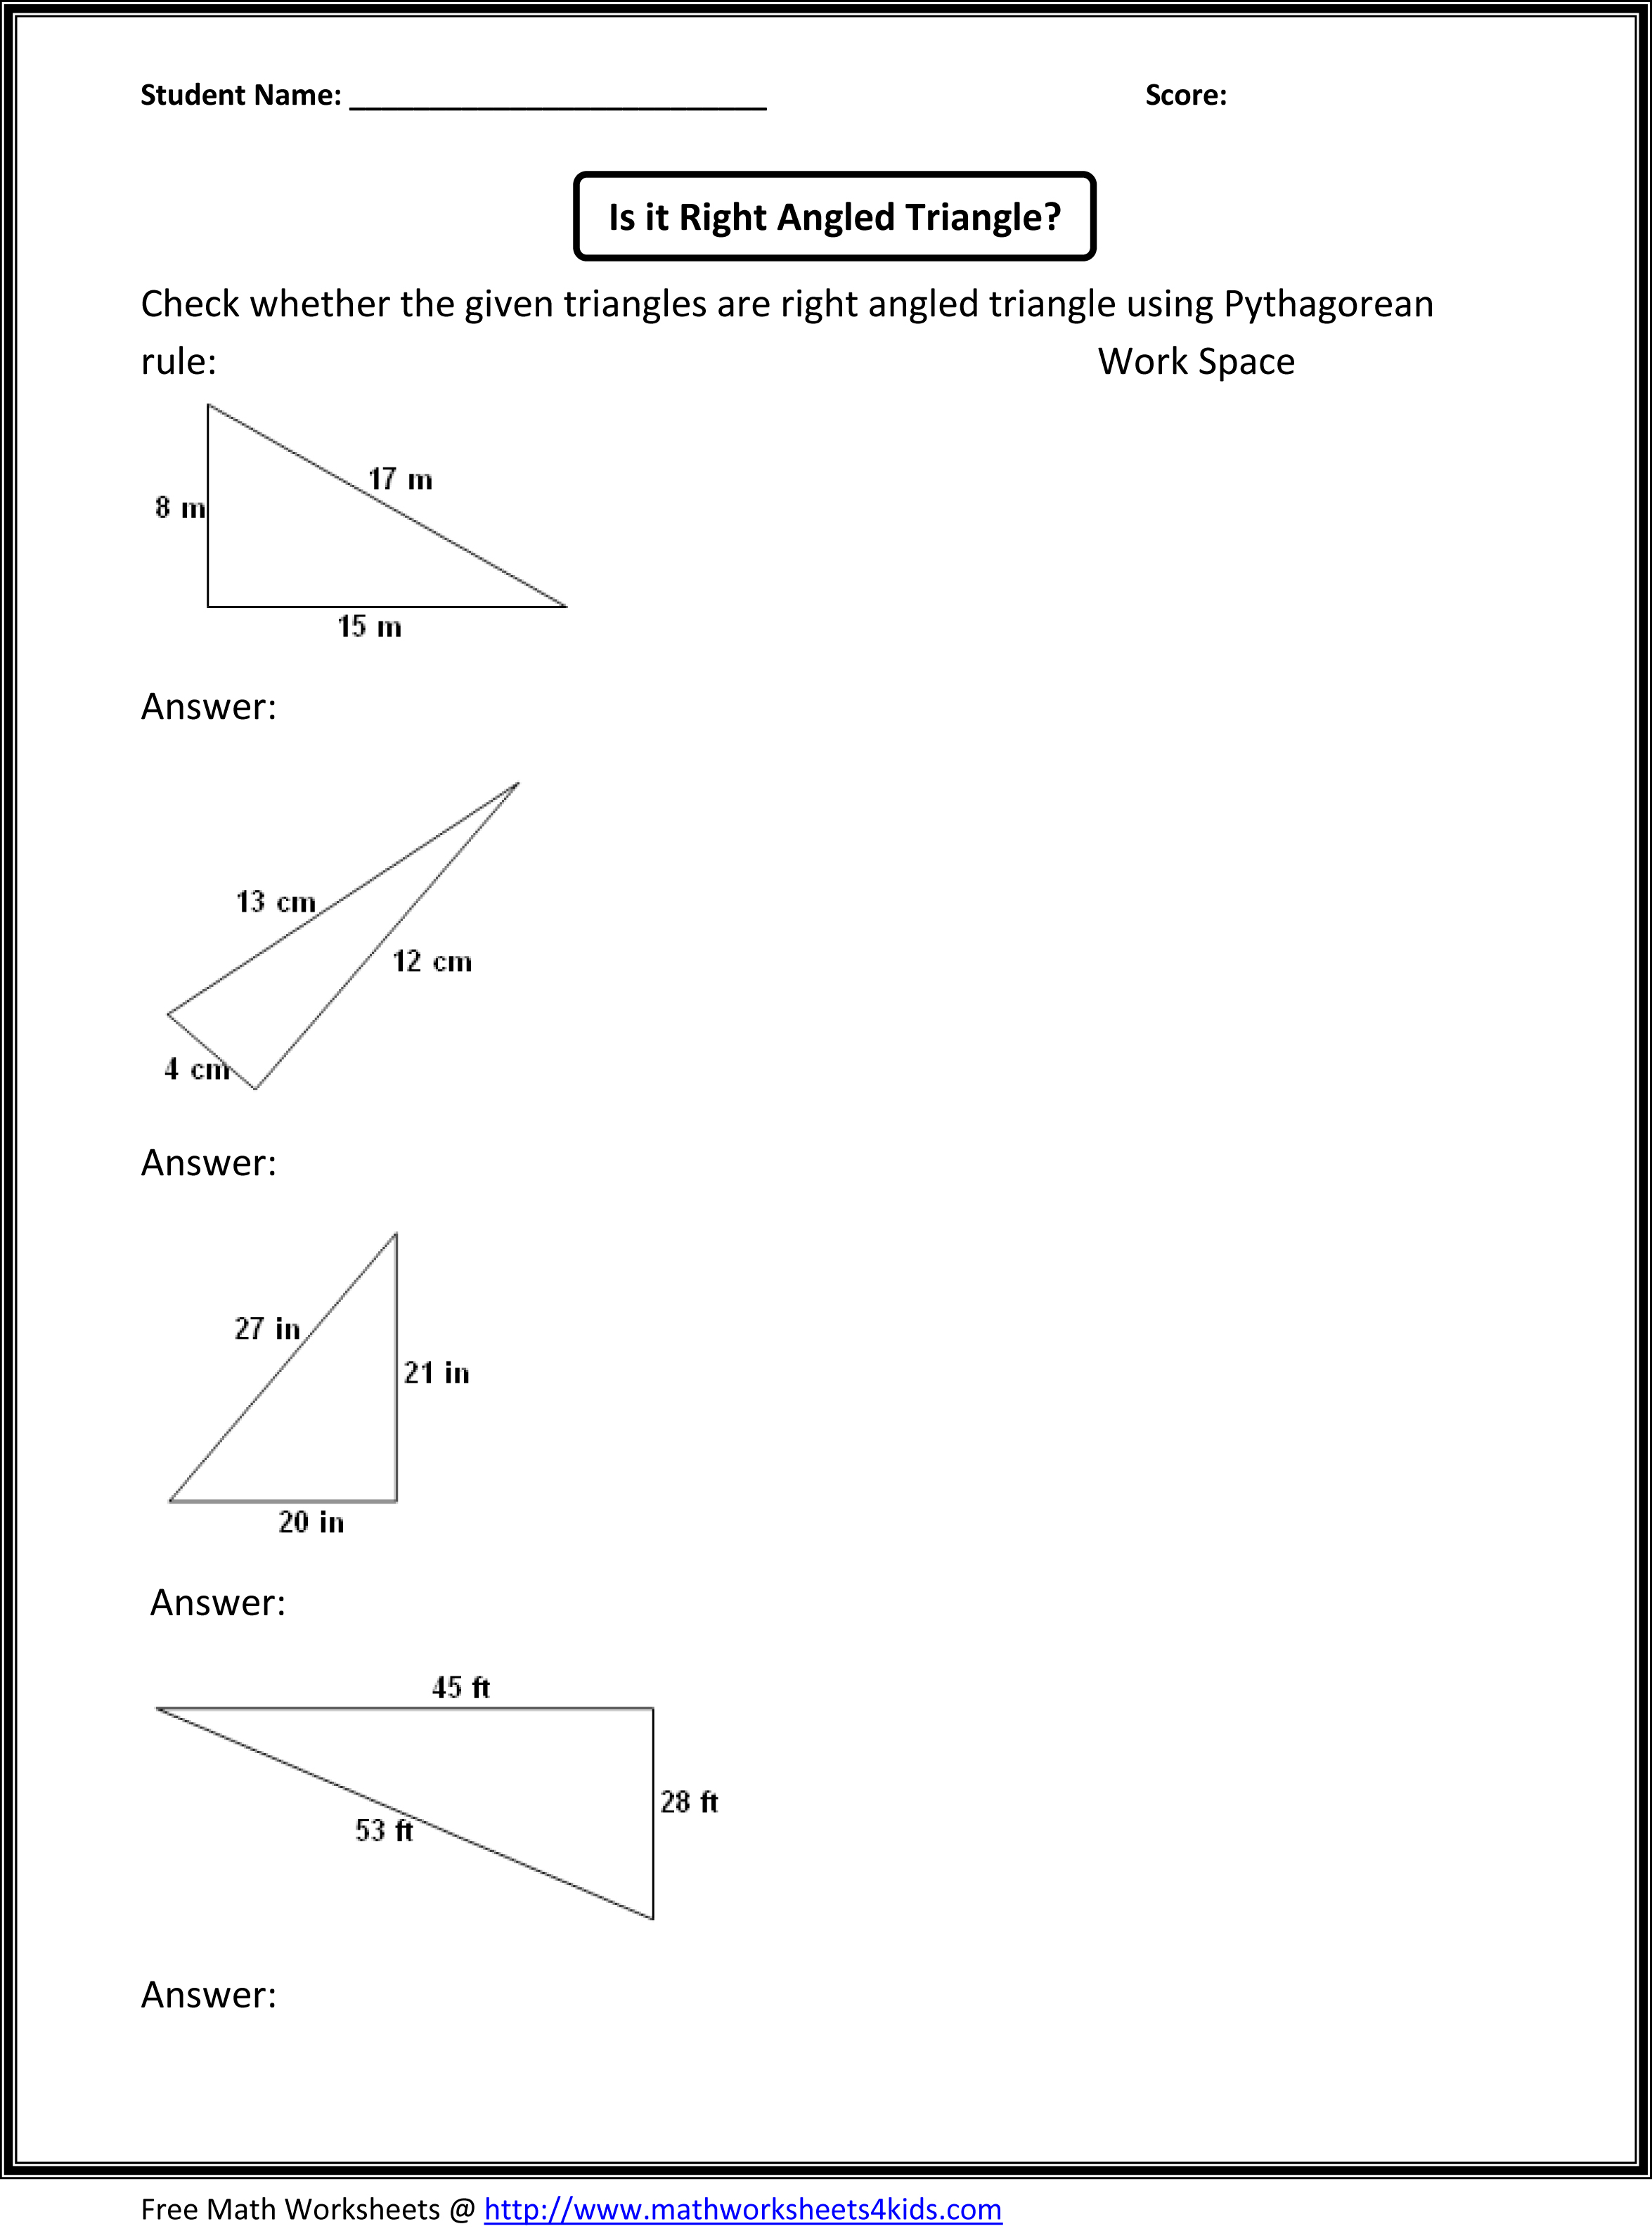 Pythagoras Theorem - Lessons - Blendspace Intended For Pythagorean Theorem Worksheet Answers